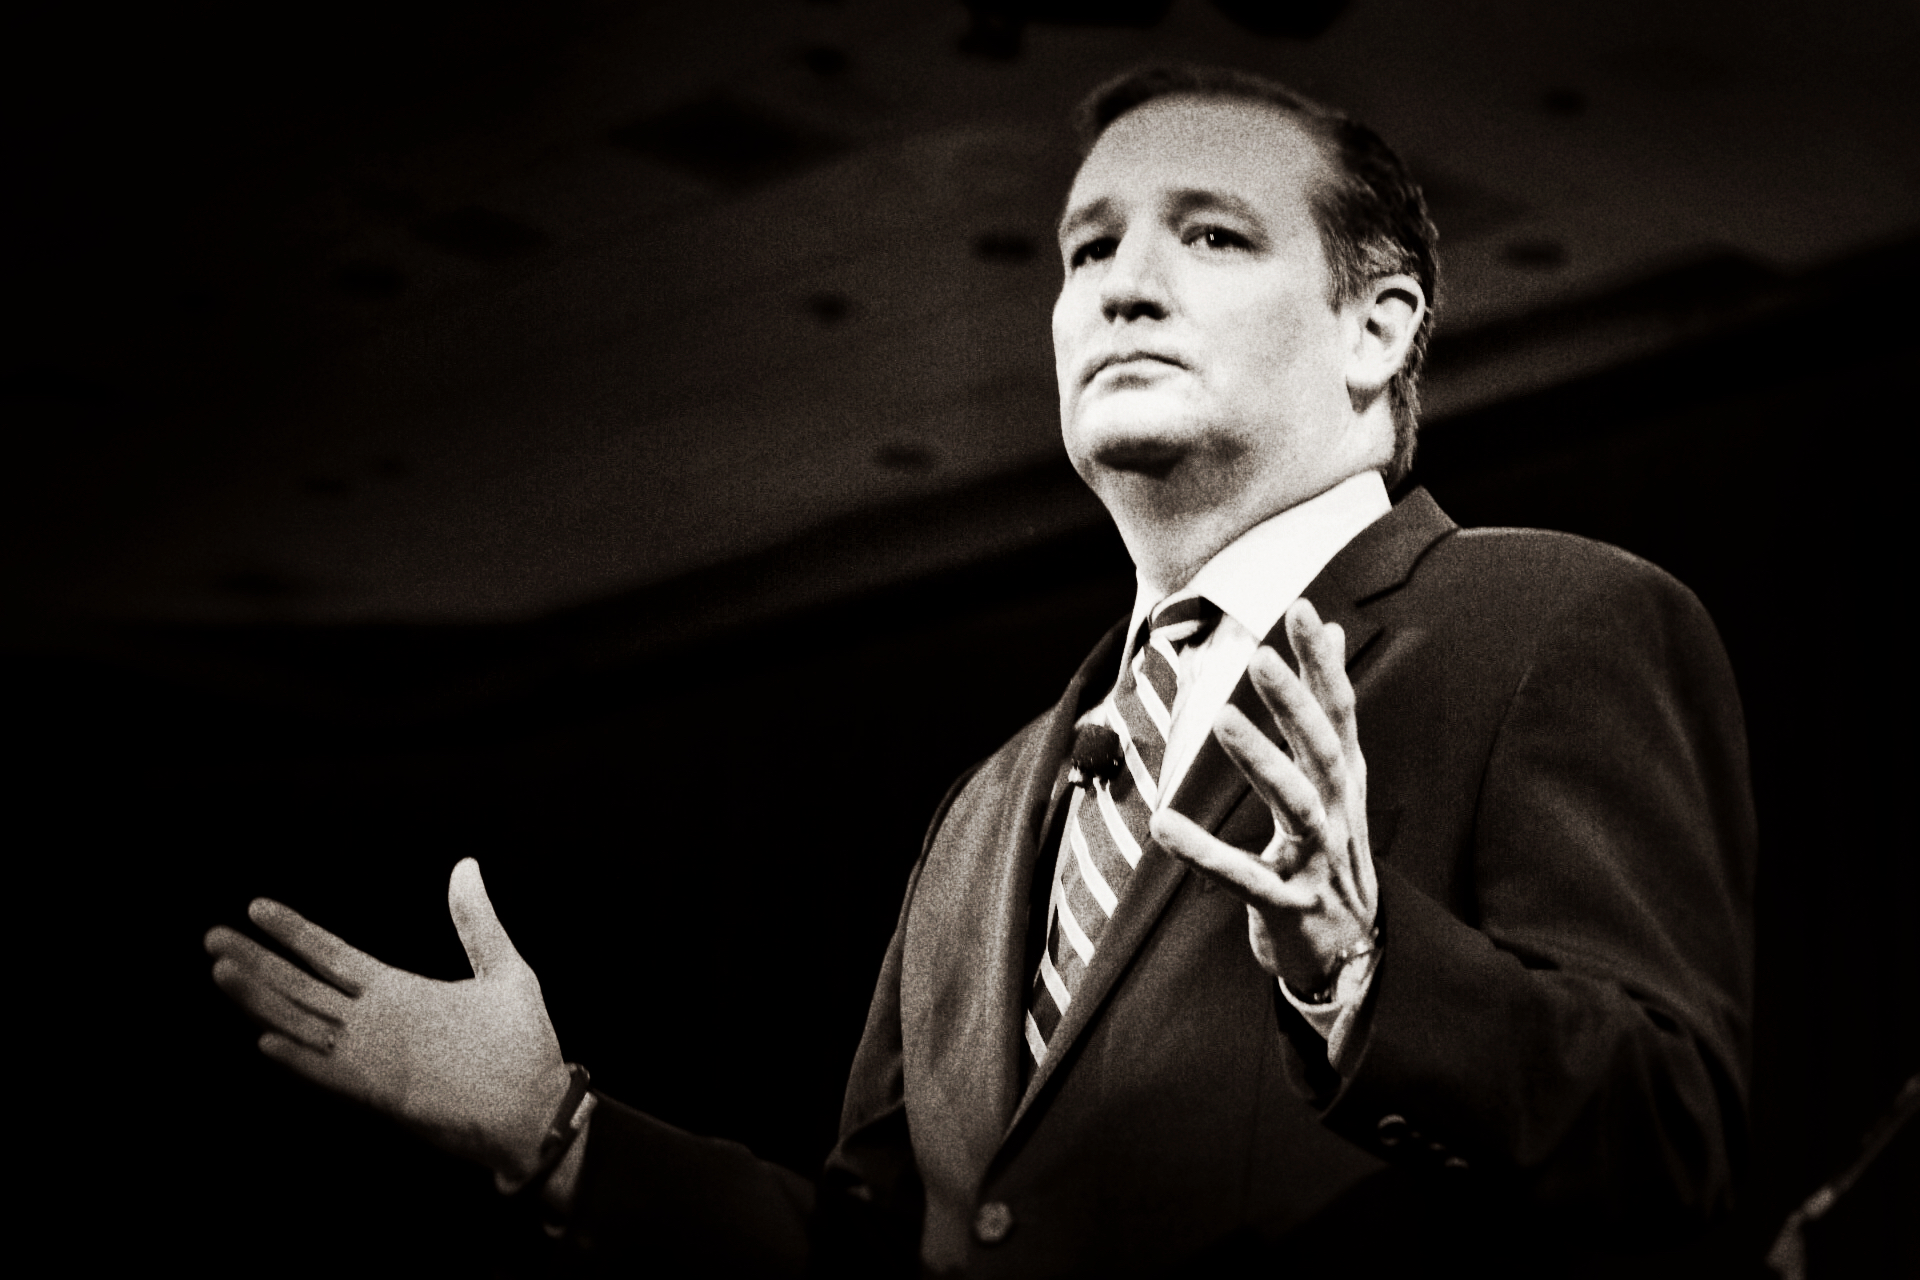 Ted Cruz speaks on stage at CPAC in National Harbor, Md. on Feb. 26, 2015. (Mark Peterson—Redux for TIME)